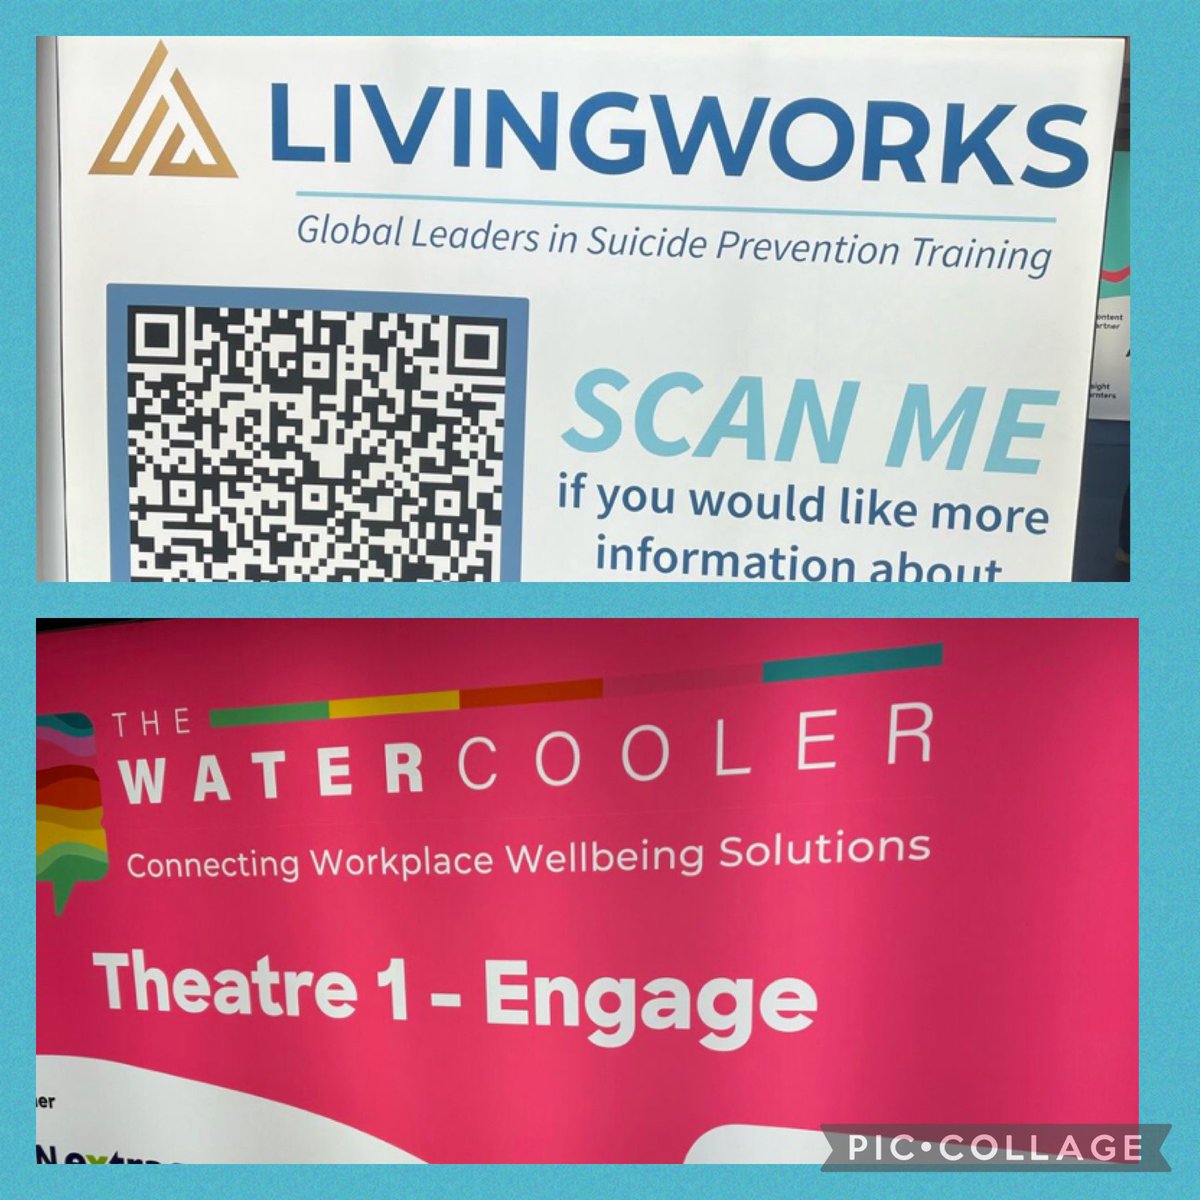 Booth A130 ready and waiting. @Living_Works can help you create a suicide safer workplace #SuicidePrevention #watercoolerevent